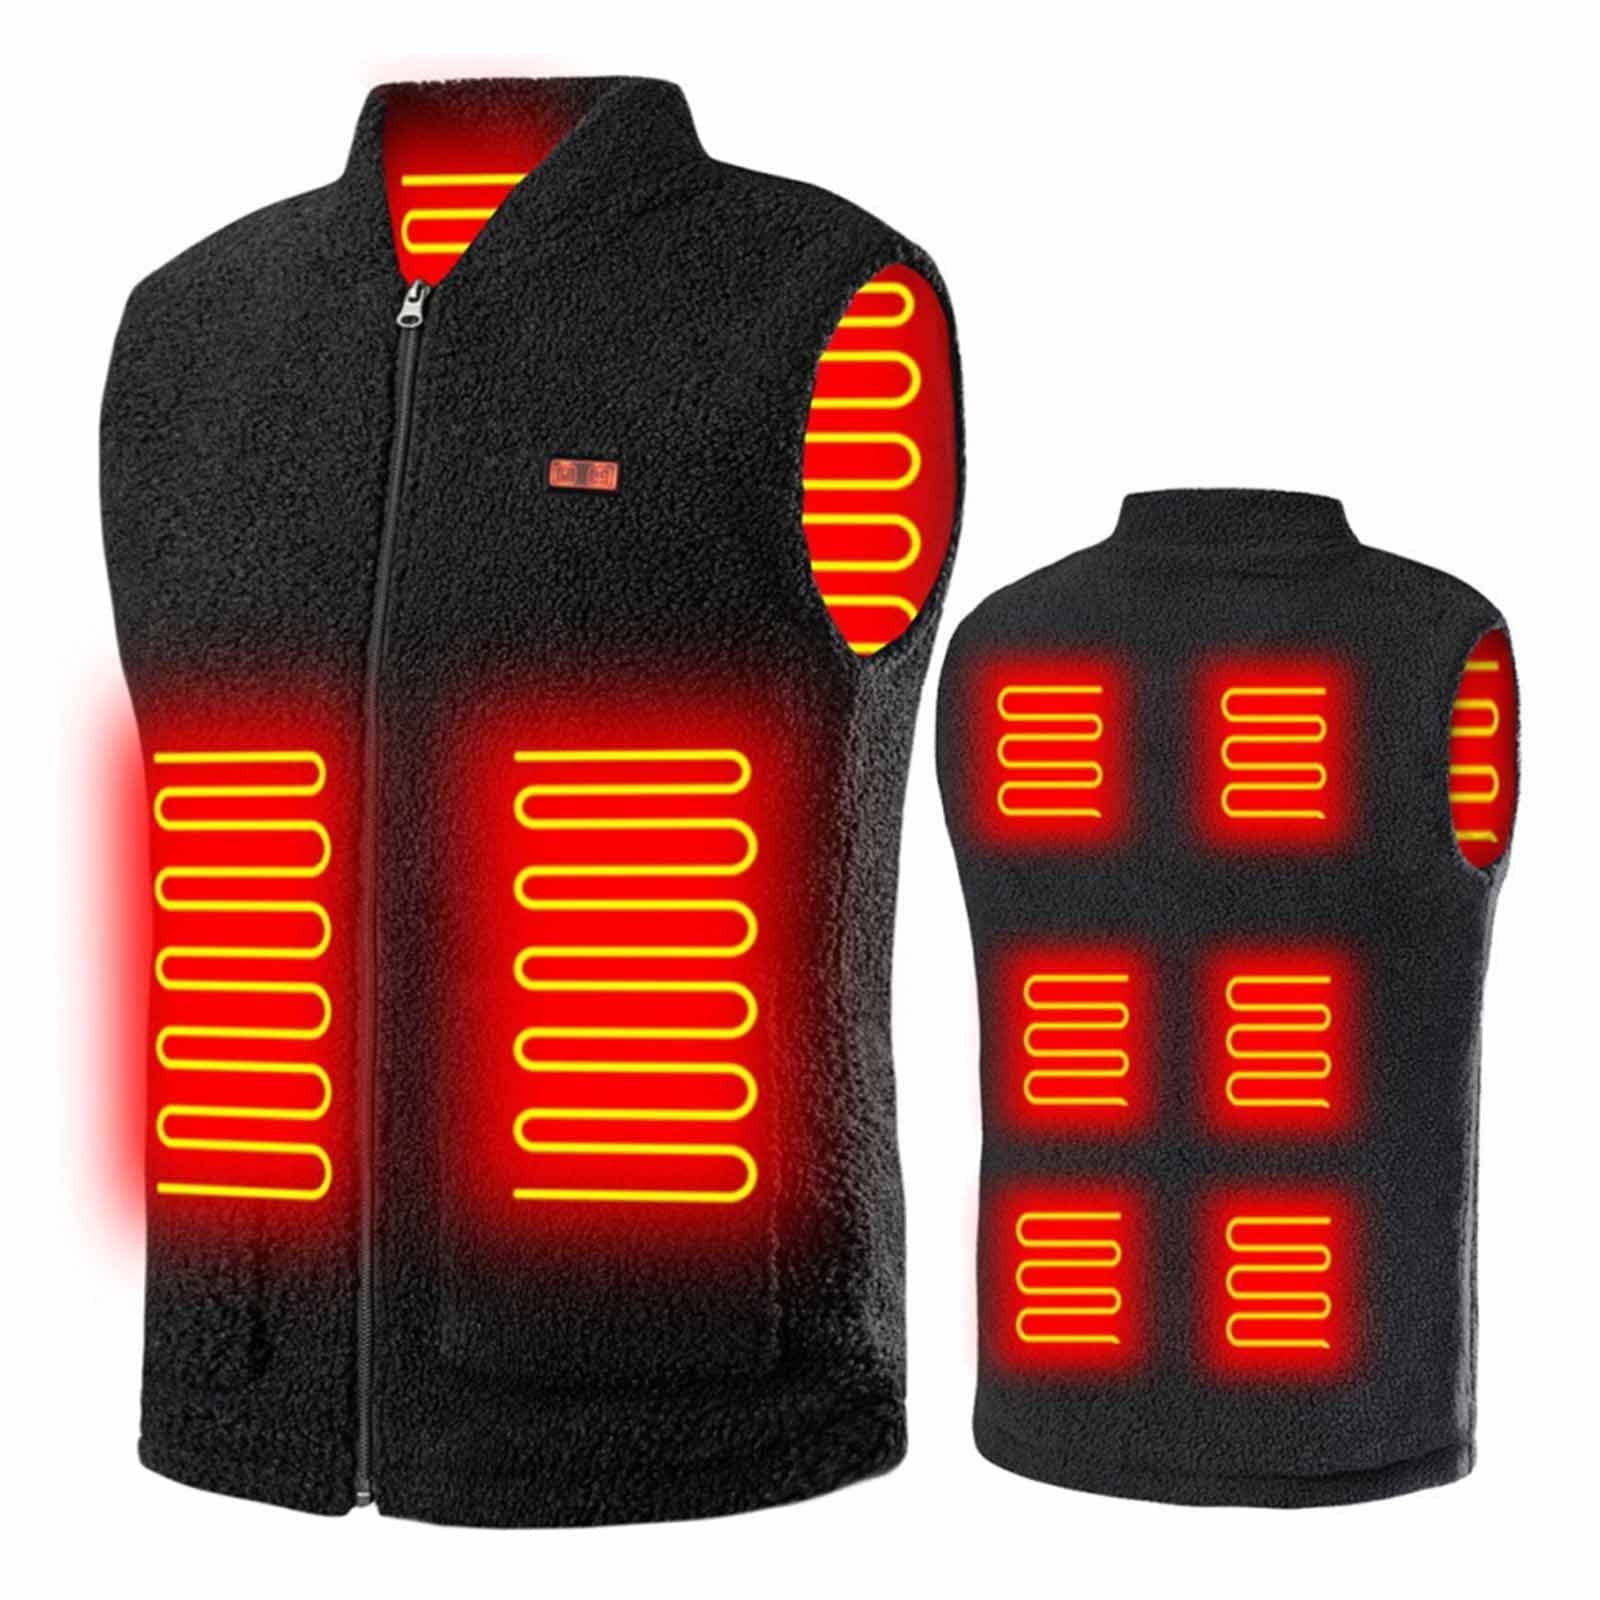  Yeah-hhi Heated Vest for Men/Women with Massage Function Warm  Coat 11 Heating Zones, 3 Controls for Skiing, Hiking,M,Black